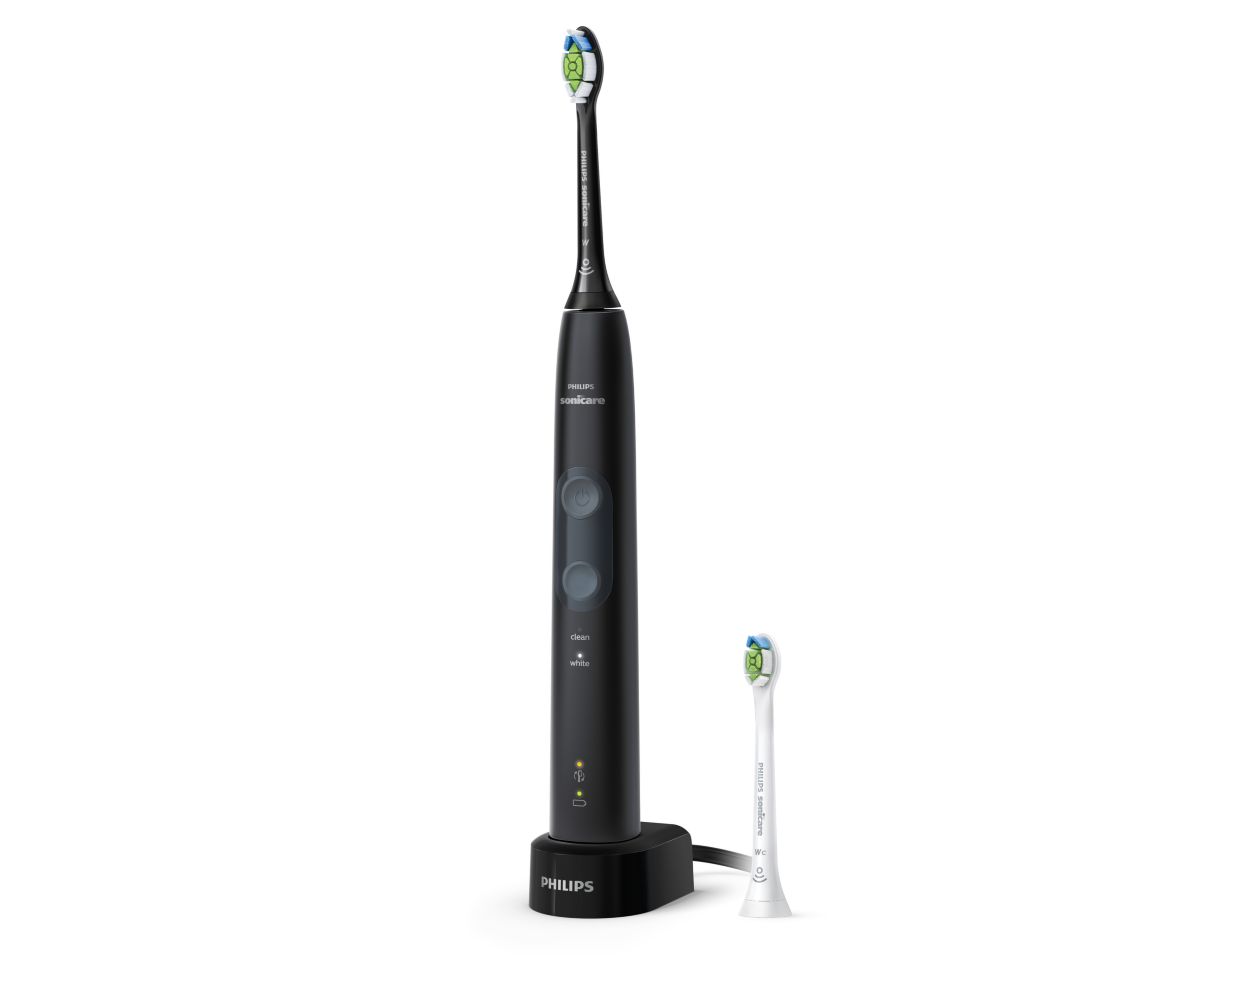 Protectclean ソニッケアー プロテクトクリーン プラス Hx6428 03 Sonicare